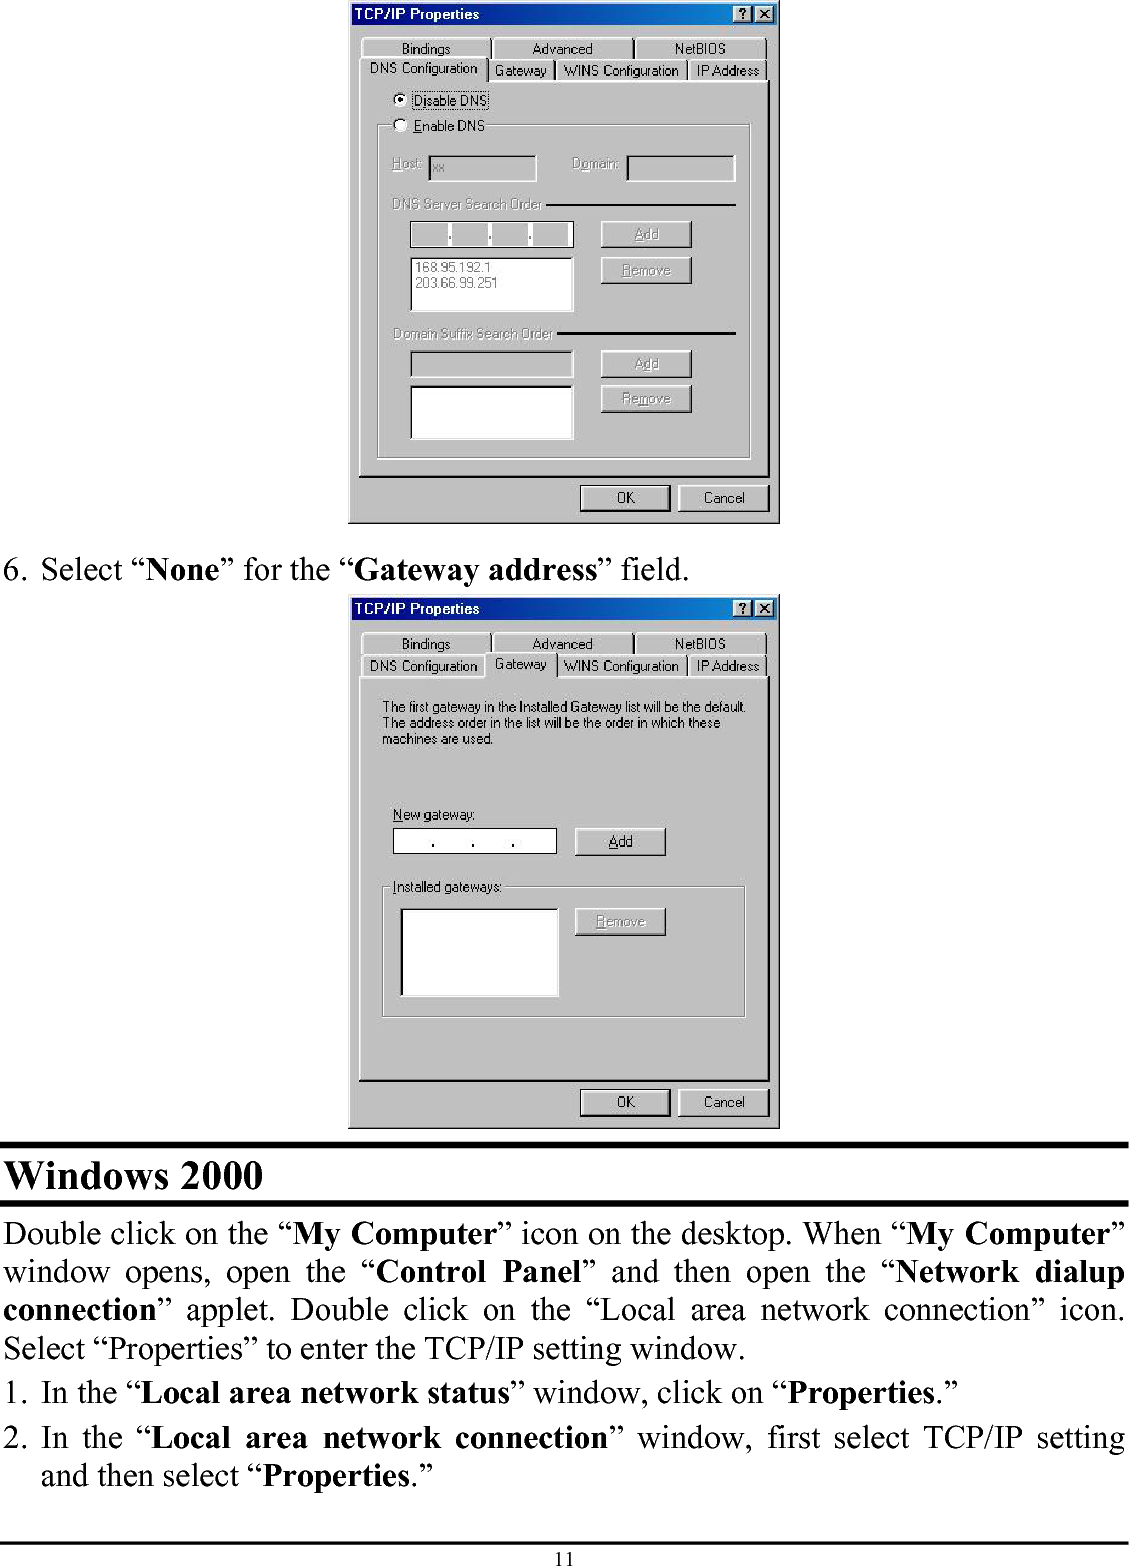 11  6. Select “None” for the “Gateway address” field.  Windows 2000 Double click on the “My Computer” icon on the desktop. When “My Computer” window opens, open the “Control Panel” and then open the “Network dialup connection” applet. Double click on the “Local area network connection” icon. Select “Properties” to enter the TCP/IP setting window. 1. In the “Local area network status” window, click on “Properties.” 2. In the “Local area network connection” window, first select TCP/IP setting and then select “Properties.” 